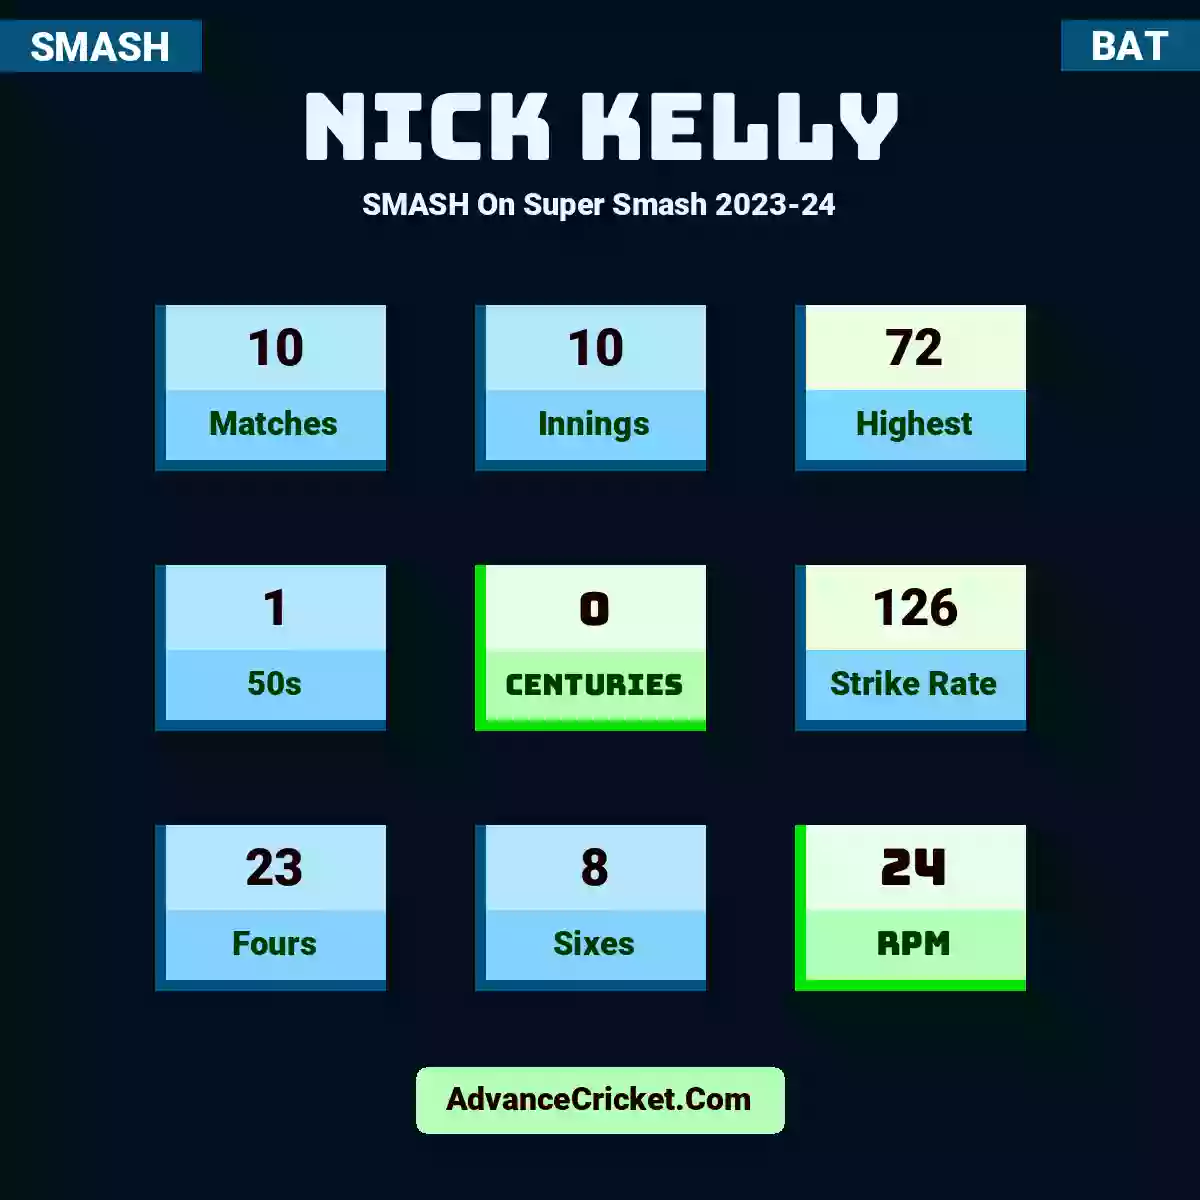 Nick Kelly SMASH  On Super Smash 2023-24, Nick Kelly played 10 matches, scored 72 runs as highest, 1 half-centuries, and 0 centuries, with a strike rate of 126. N.Kelly hit 23 fours and 8 sixes, with an RPM of 24.